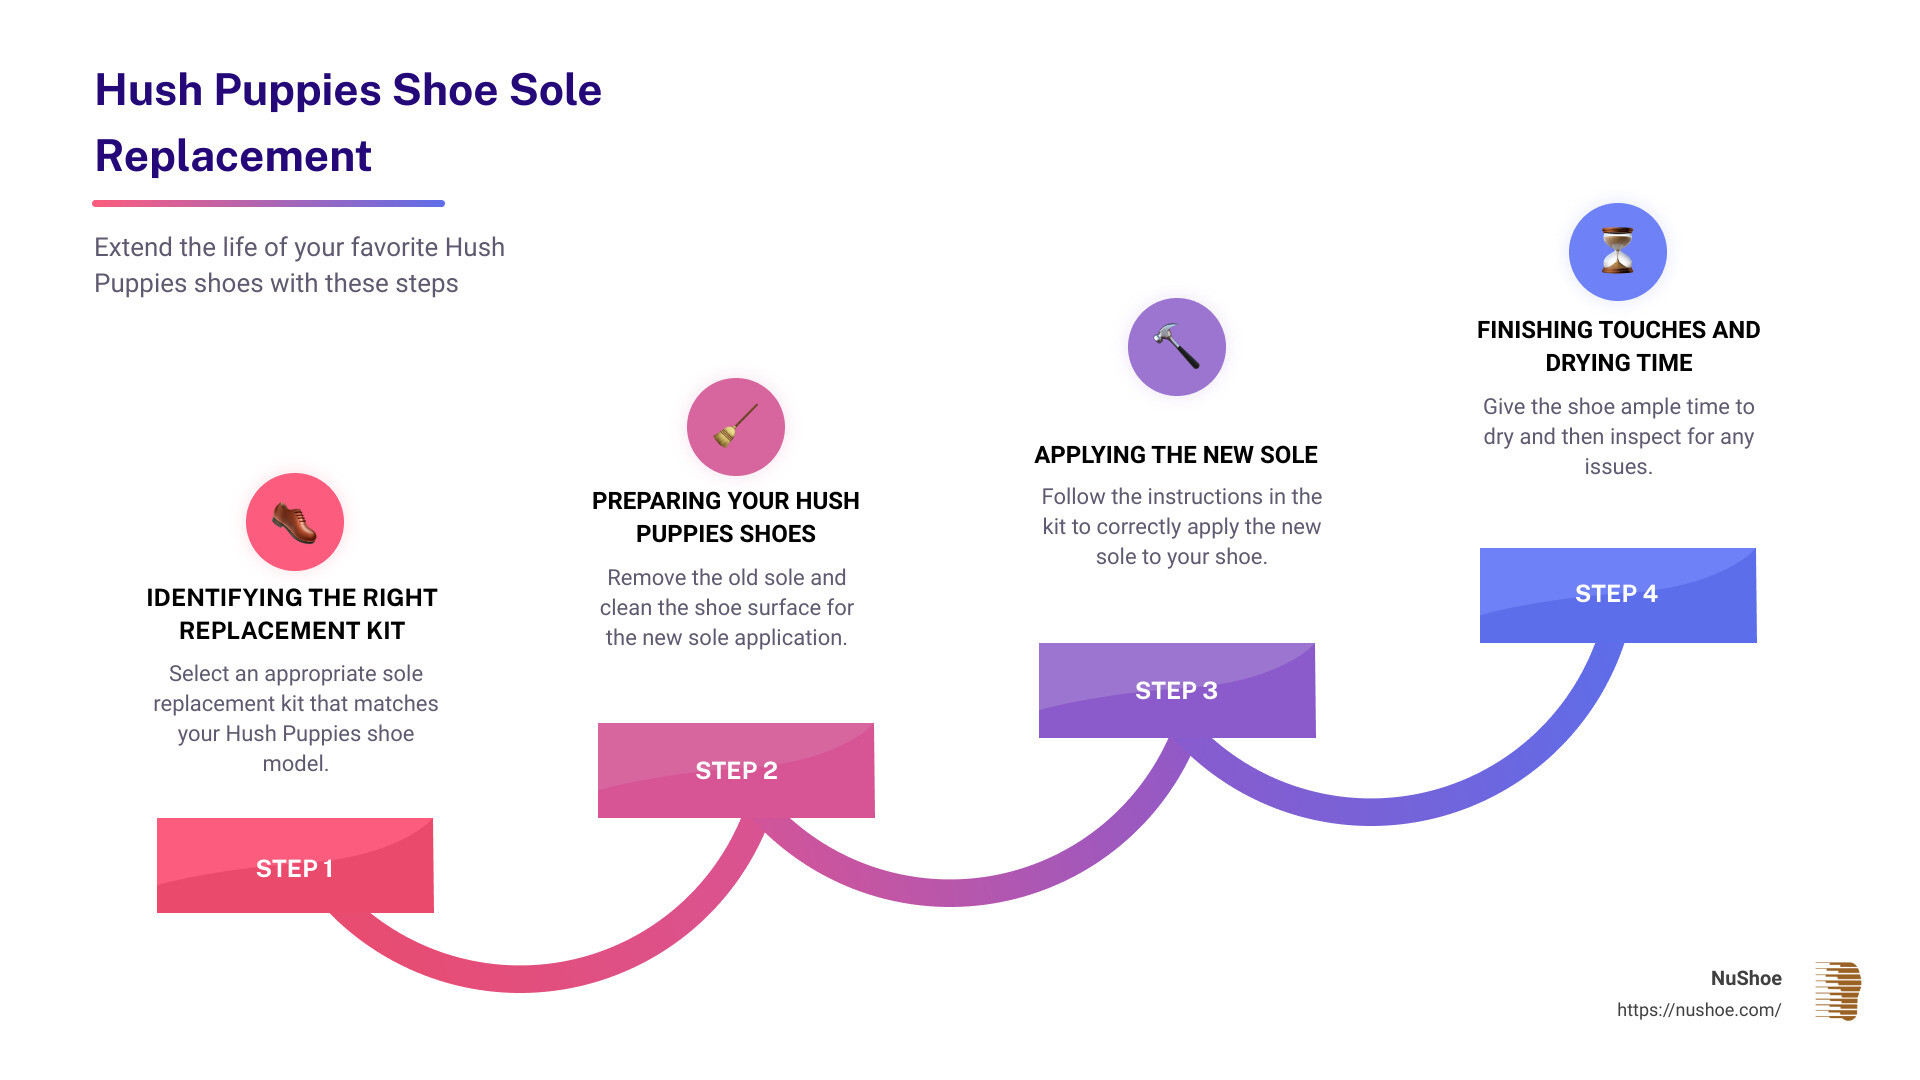 infographic about hush puppies shoe sole replacement - hush puppies shoe sole replacement infographic step-infographic-4-steps